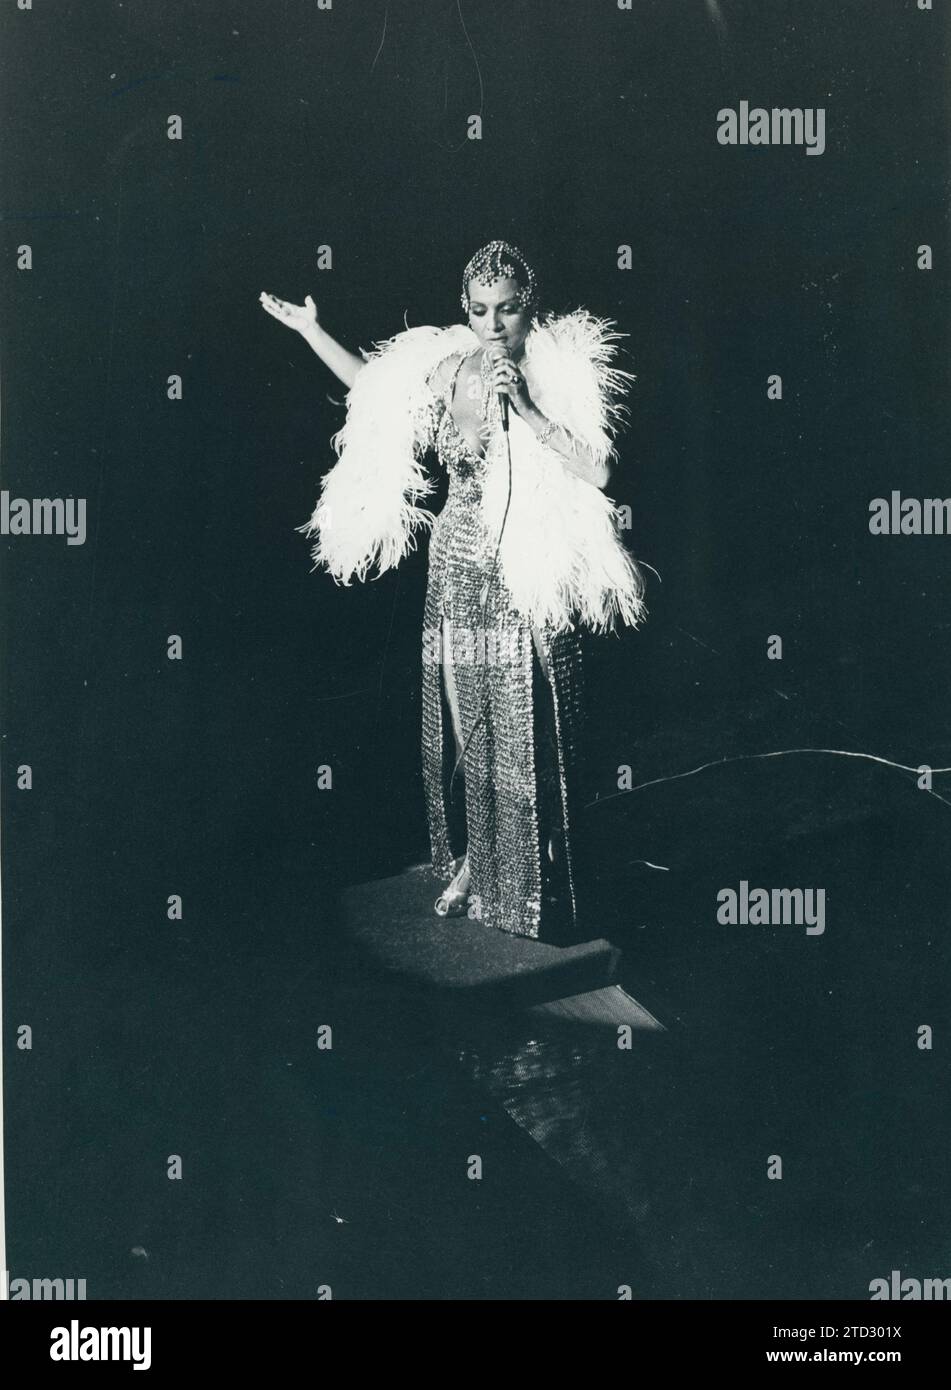 Madrid, September 1980. The actress and singer Sara Montiel in a moment of her show 'Super Sara Show' presented at the La Latina theater. The singer was accompanied by Jorge Sepúlveda, Lorenzo González, Bonet de San Pedro and Chicho Gordillo. Credit: Album / Archivo ABC / Manuel Sanz Bermejo Stock Photo